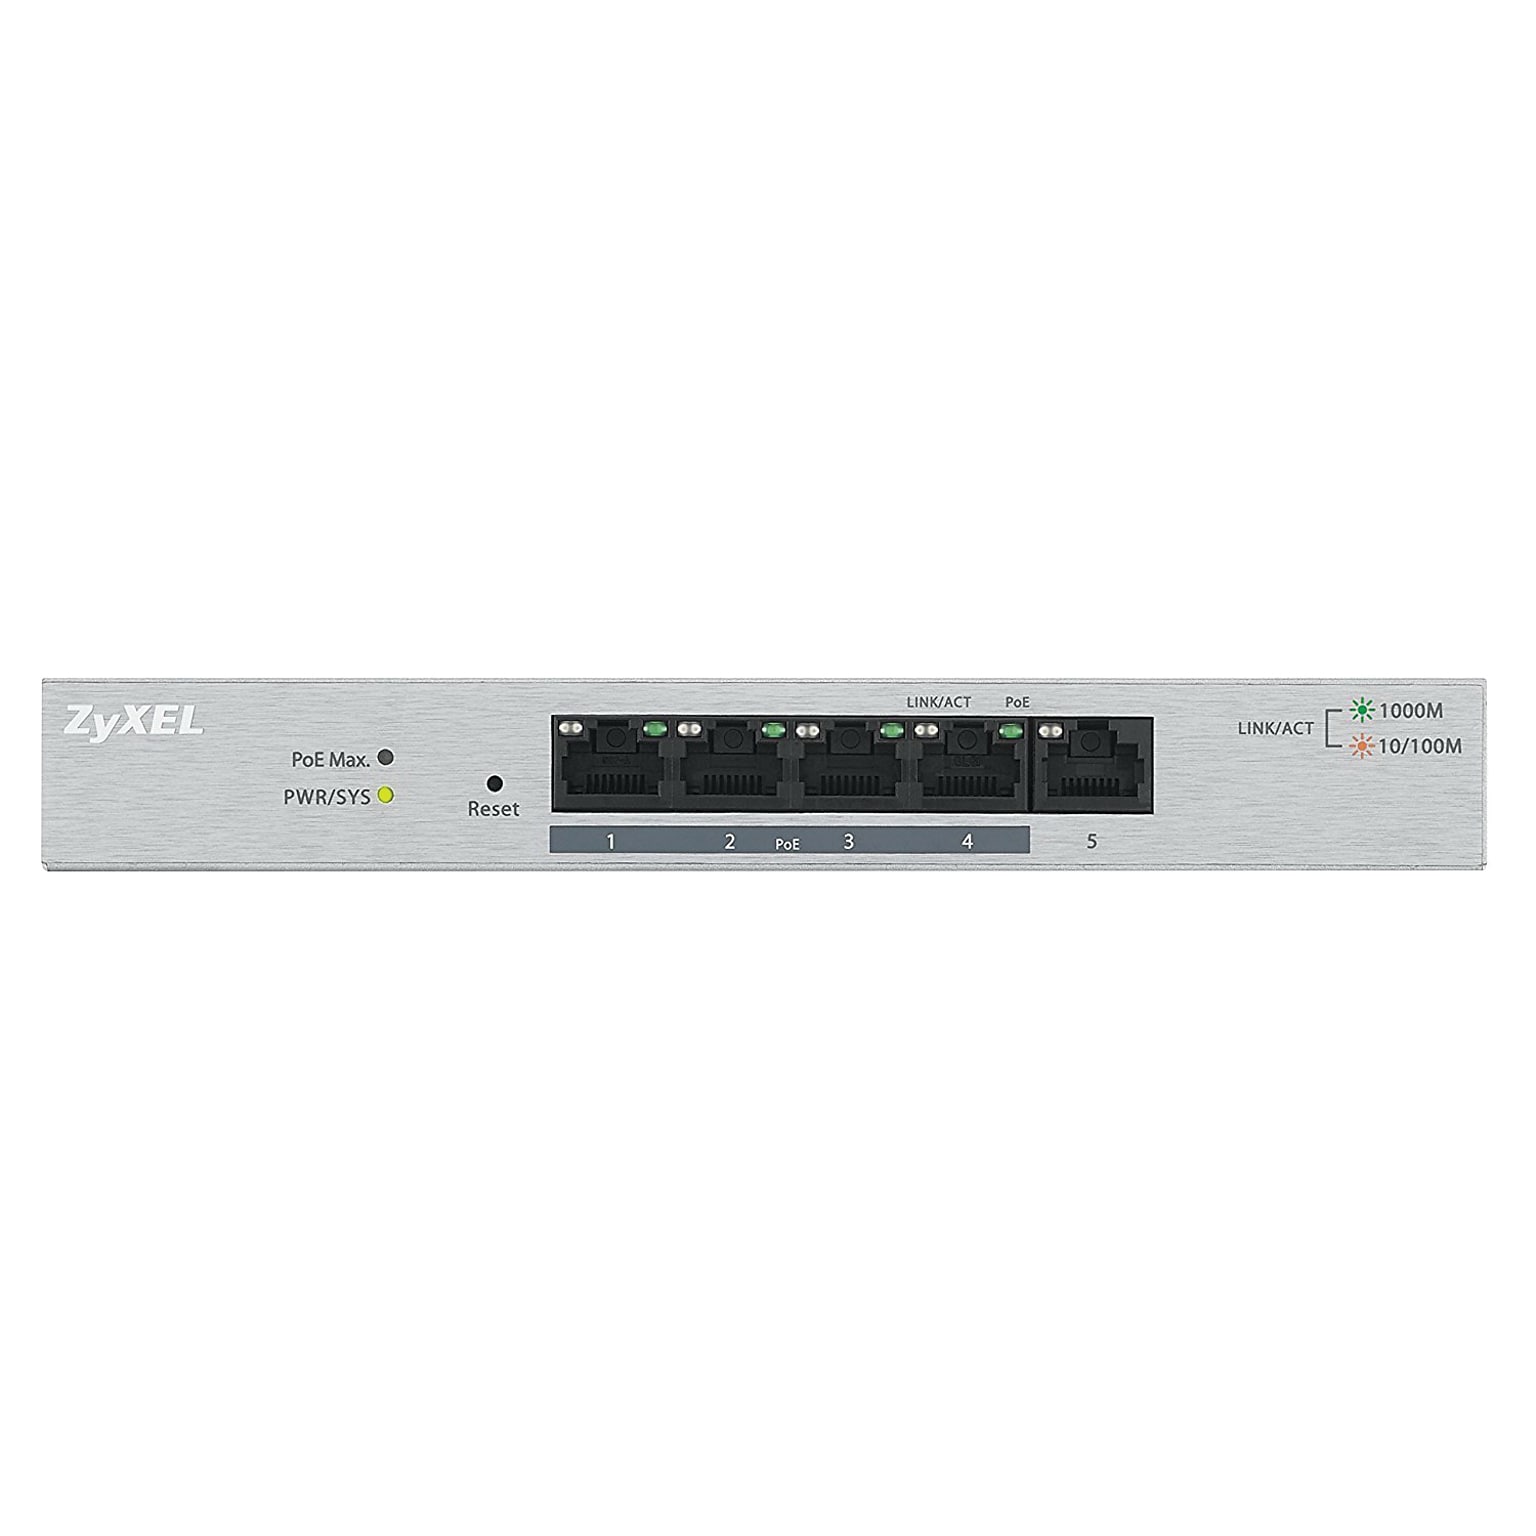 ZyXEL GS1200 8-Port Gigabit Ethernet Managed Switch, 10/100/1000 Mbps, Gray (GS12008HP)